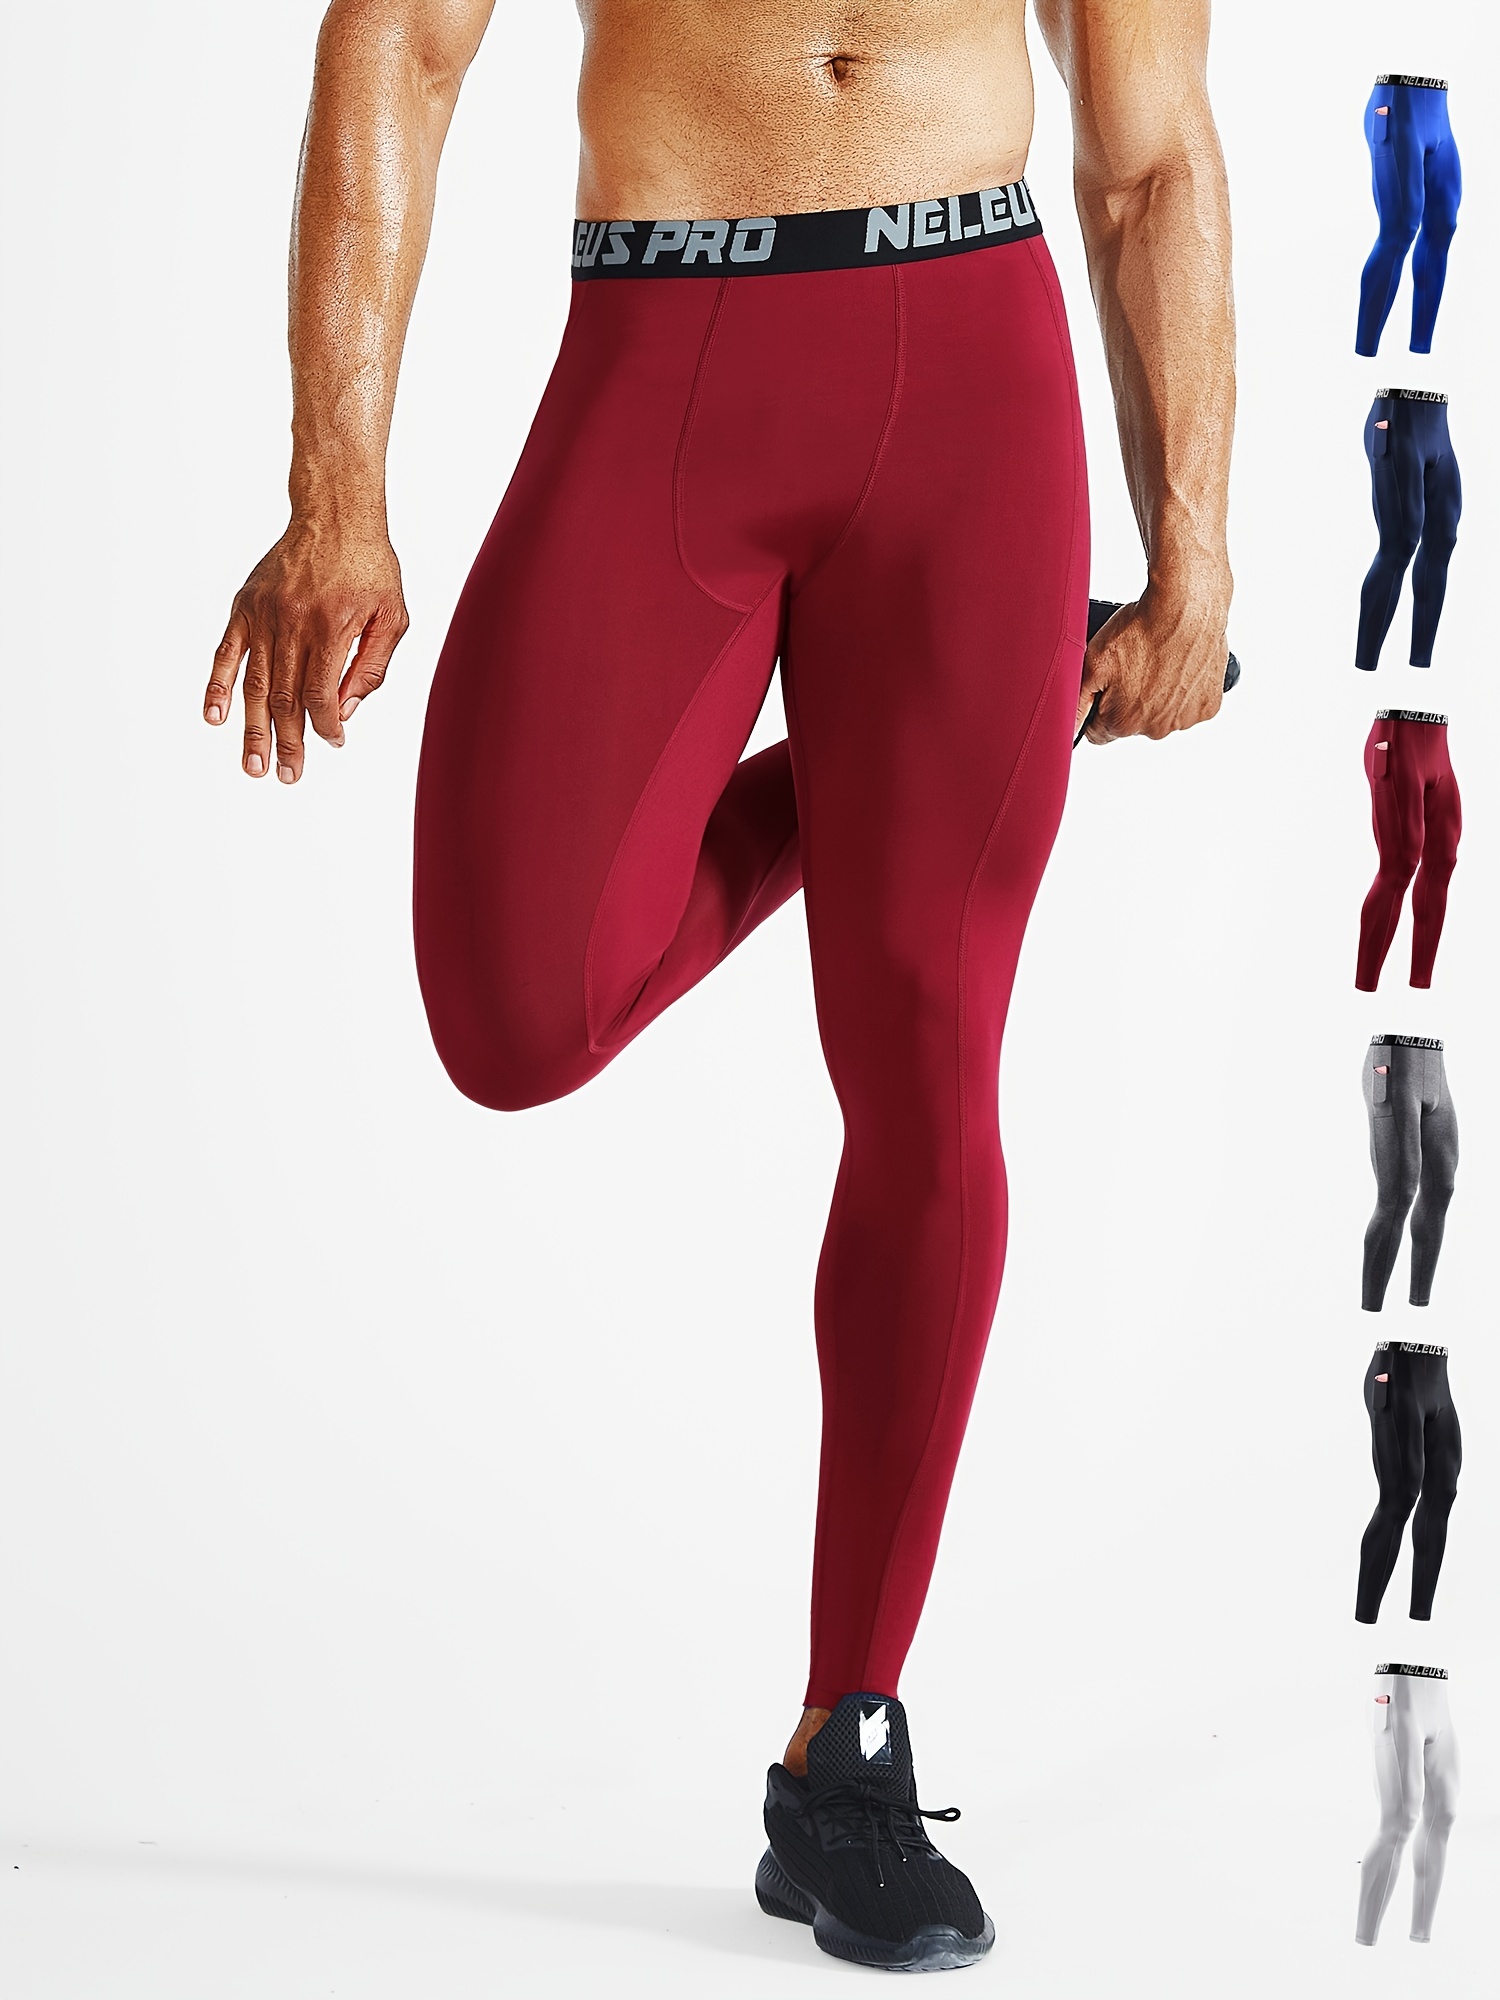 Plus Size Men's Breathable Stretchy Pro Compression Pants Running